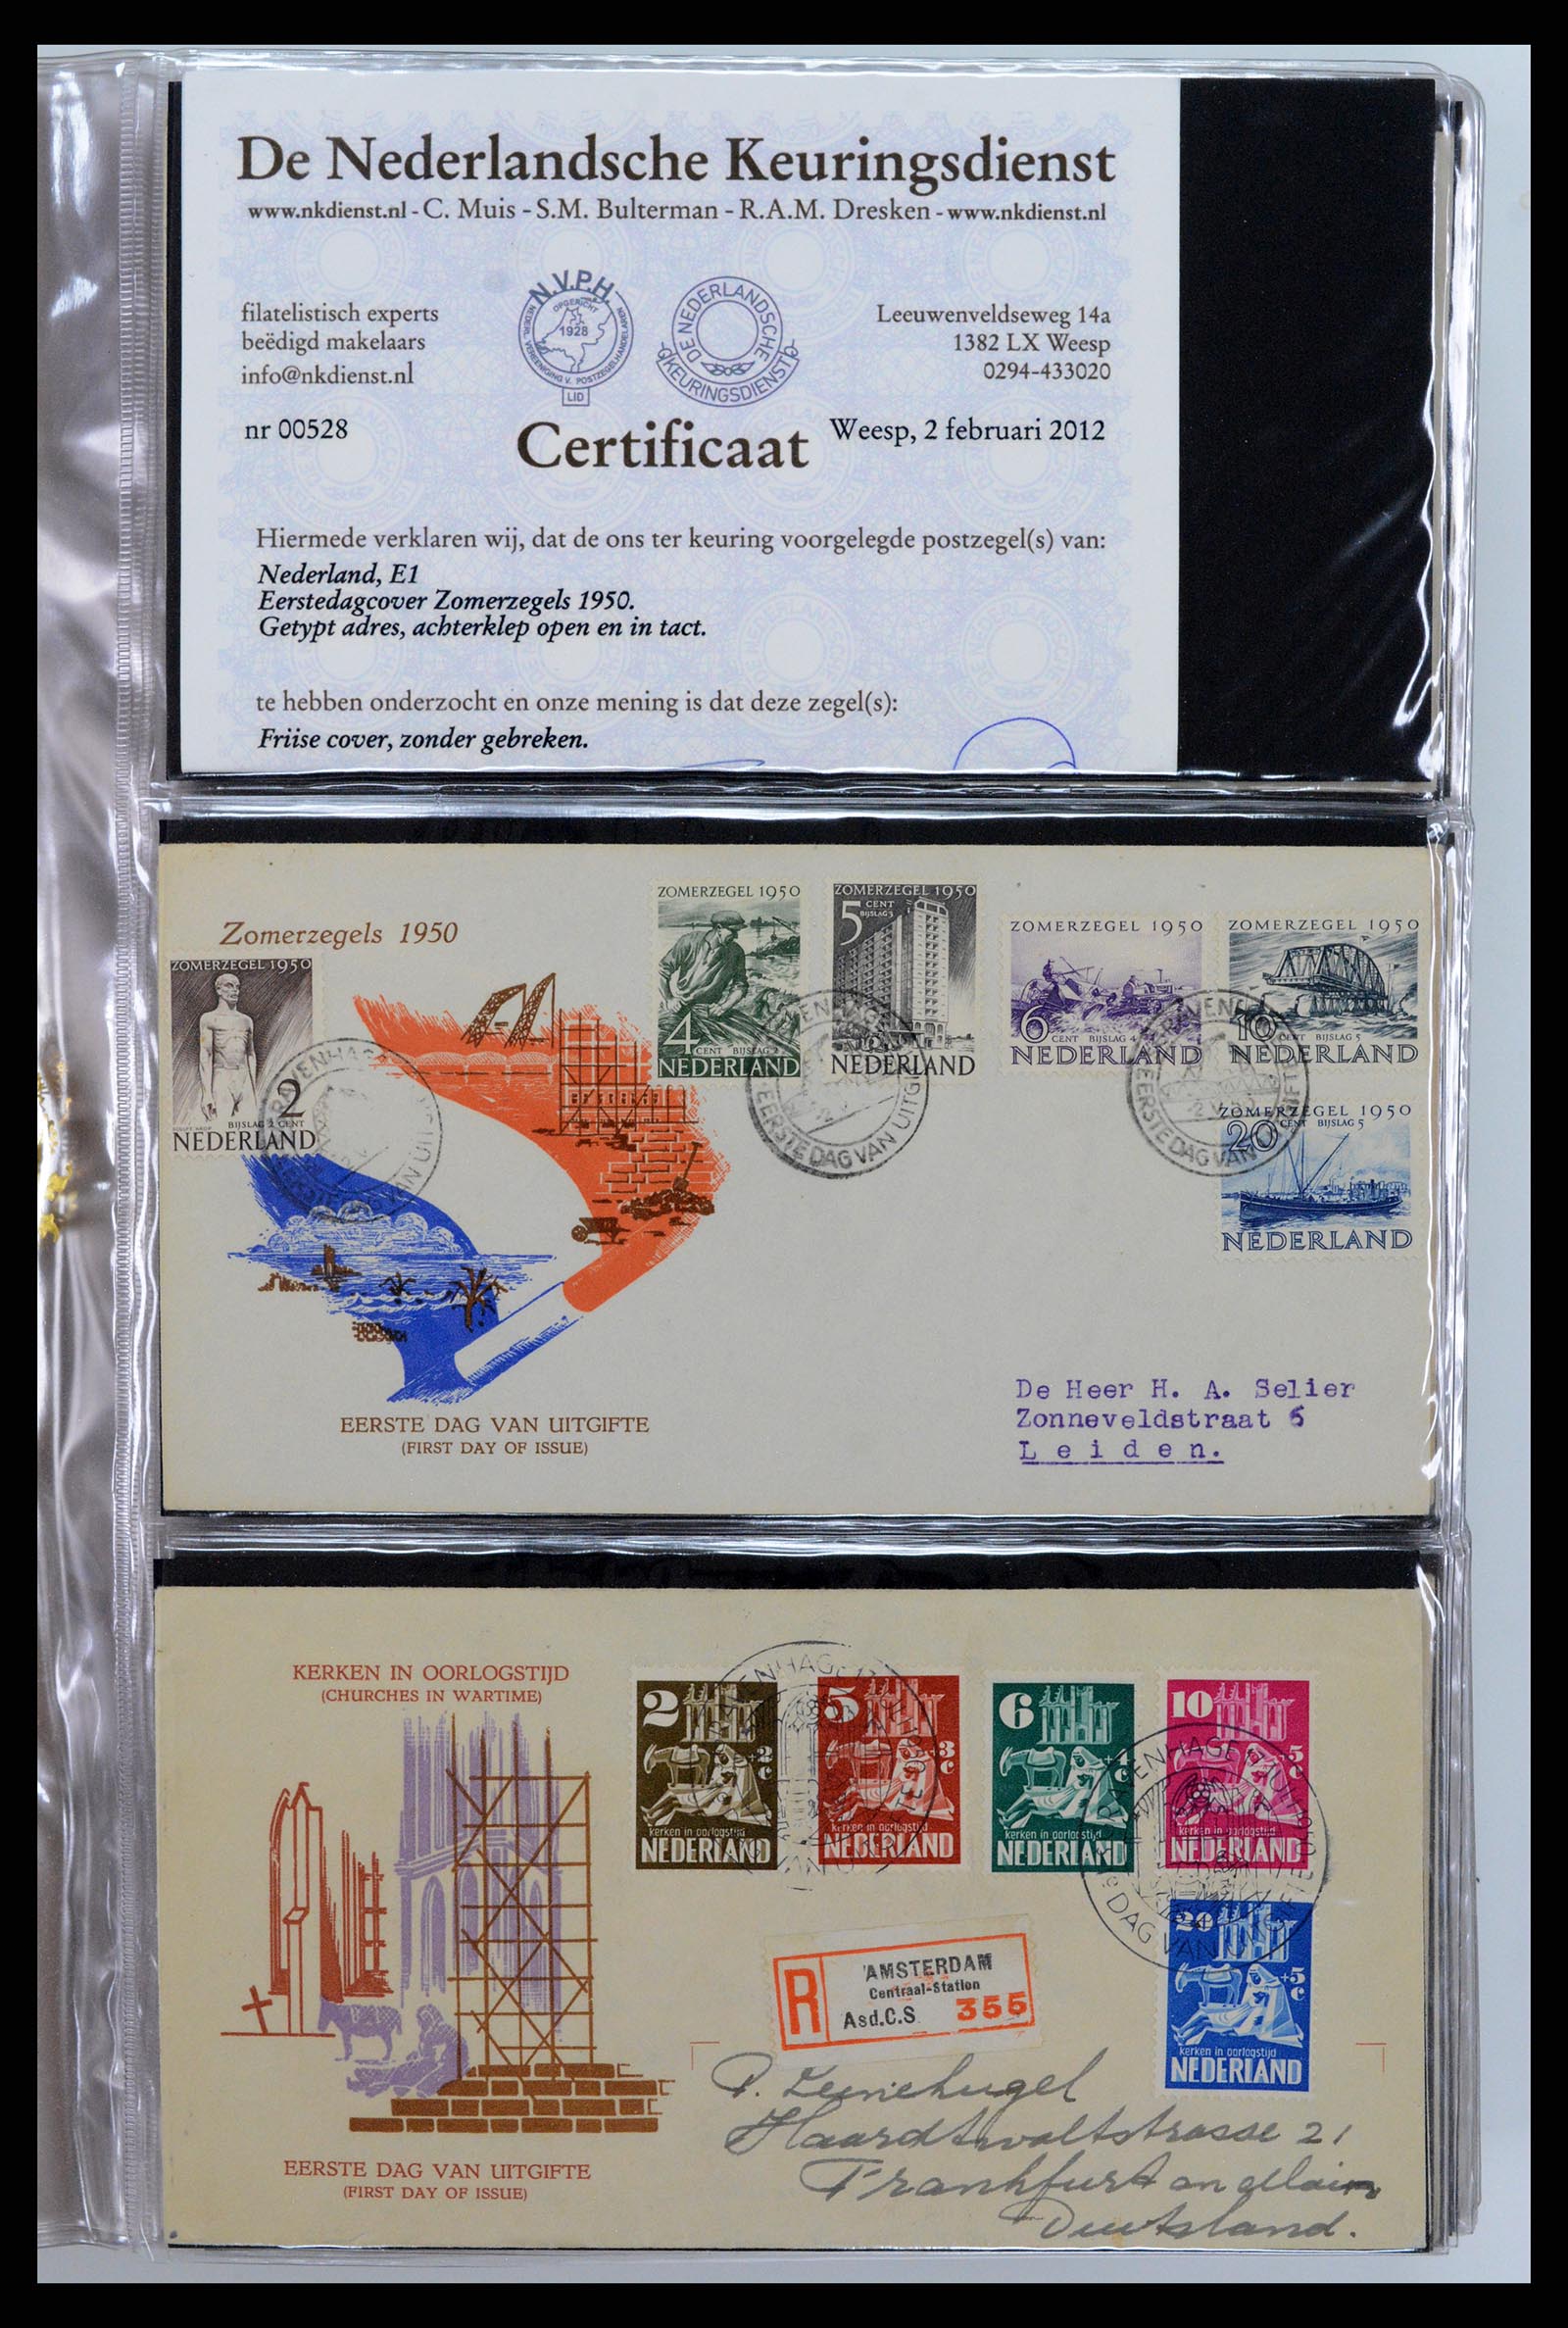 37461 001 - Stamp collection 37461 Netherlands FDC's 1950-2014.